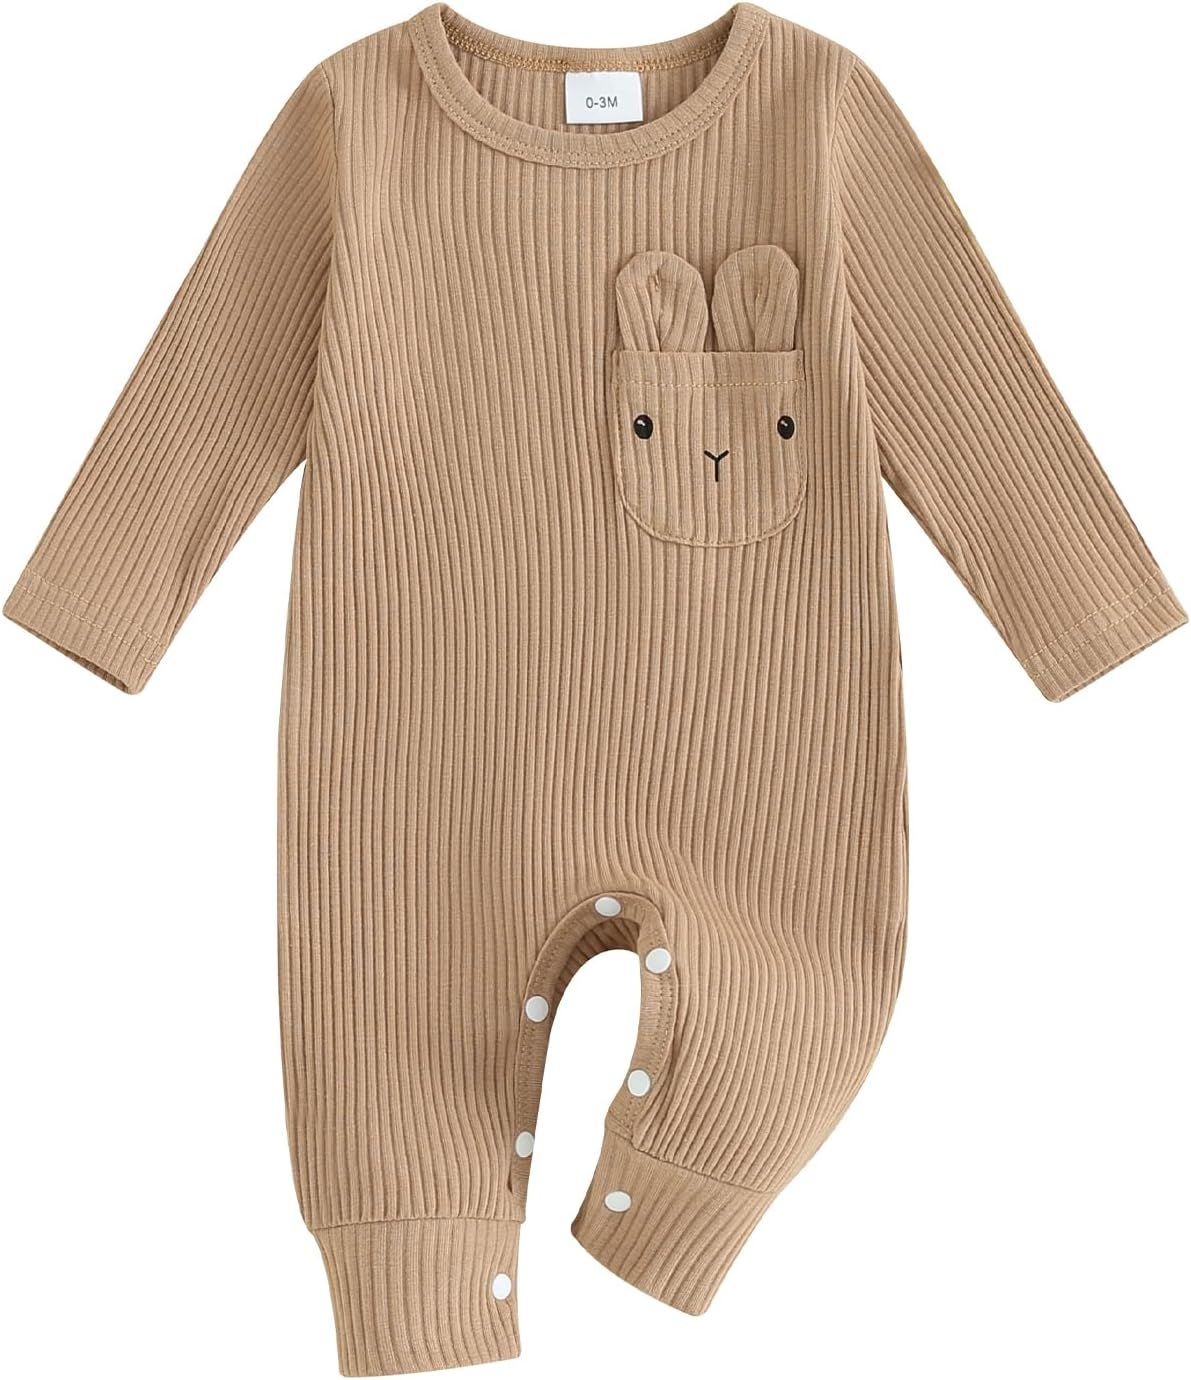 Amiblvowa Newborn Baby Boy Easter Outfit Knit Ribbed Bunny Rabbit Skin Ear Pocket Romper Jumpsuit... | Amazon (US)